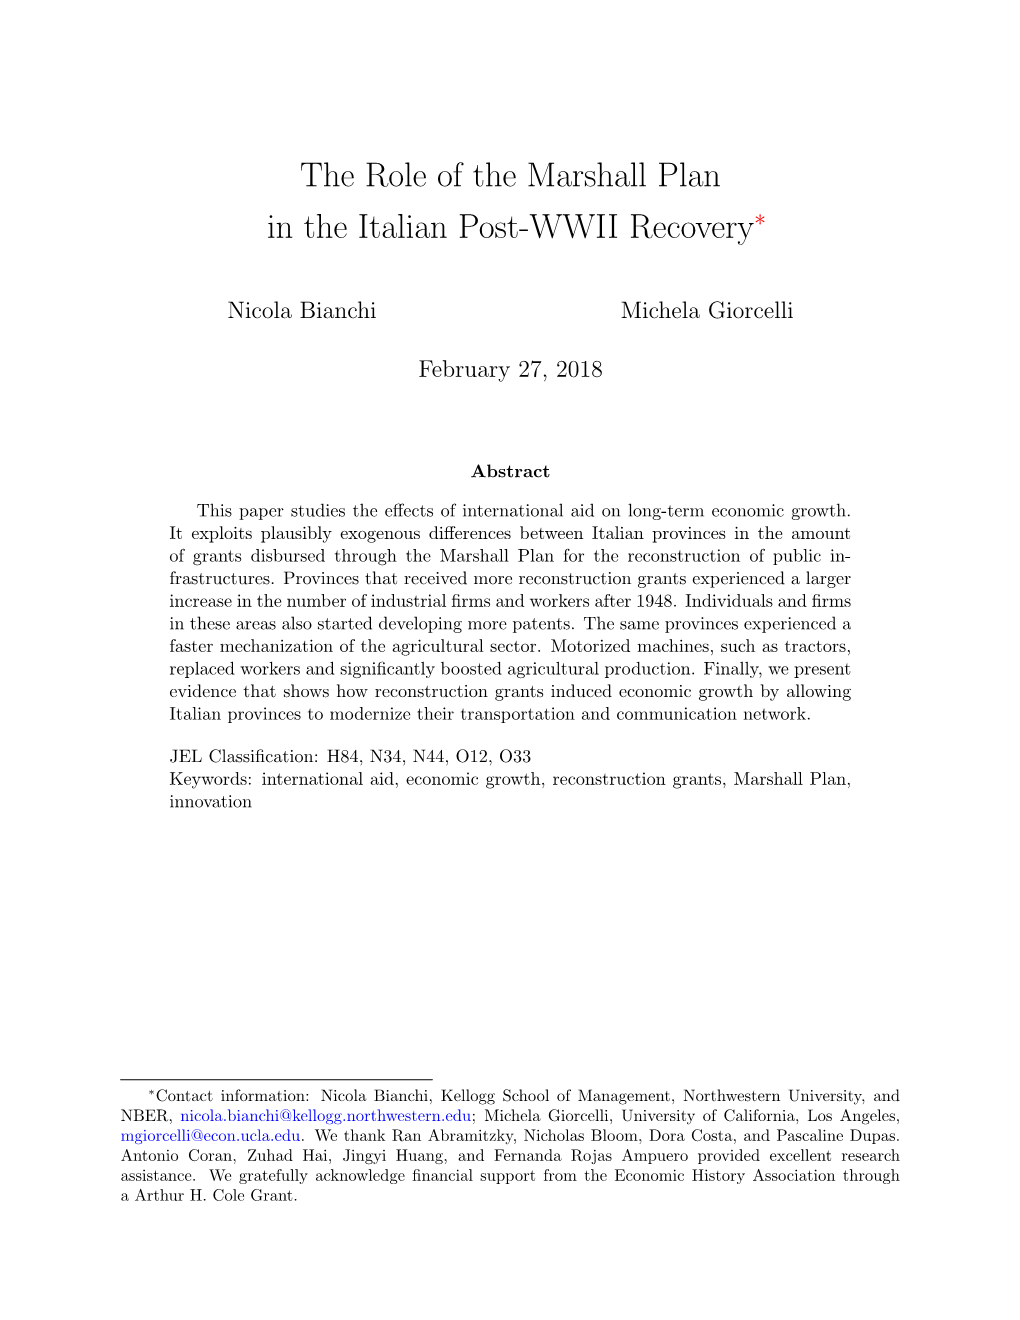 The Role of the Marshall Plan in the Italian Post-WWII Recovery